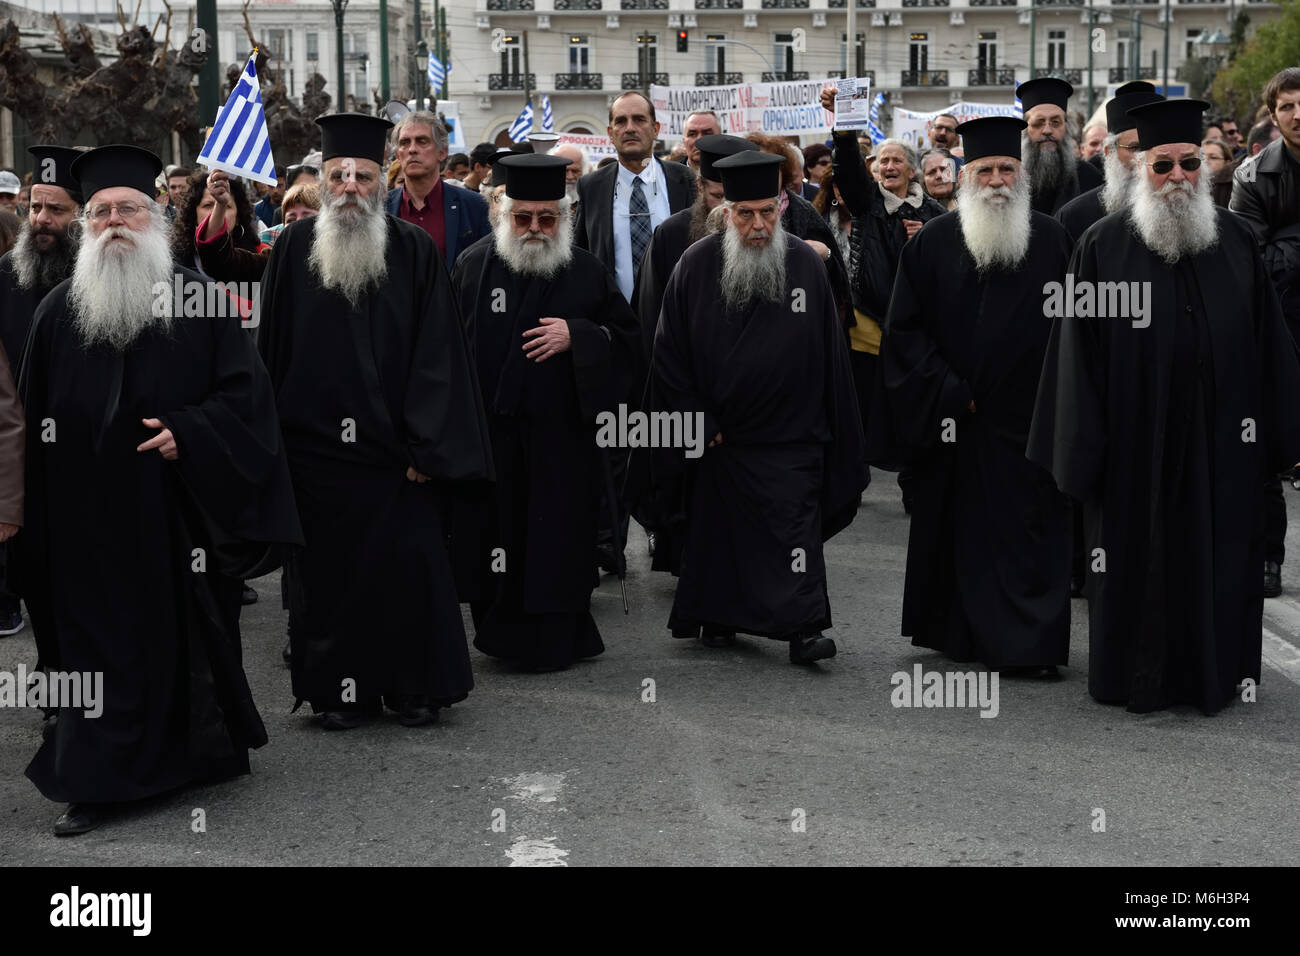 Athens, Greece, 4th March, 2018. Greek Orthodox priests head the protest march against changes in the school religion textbooks in Athens, Greece. Credit: Nicolas Koutsokostas/Alamy Live News. Stock Photo